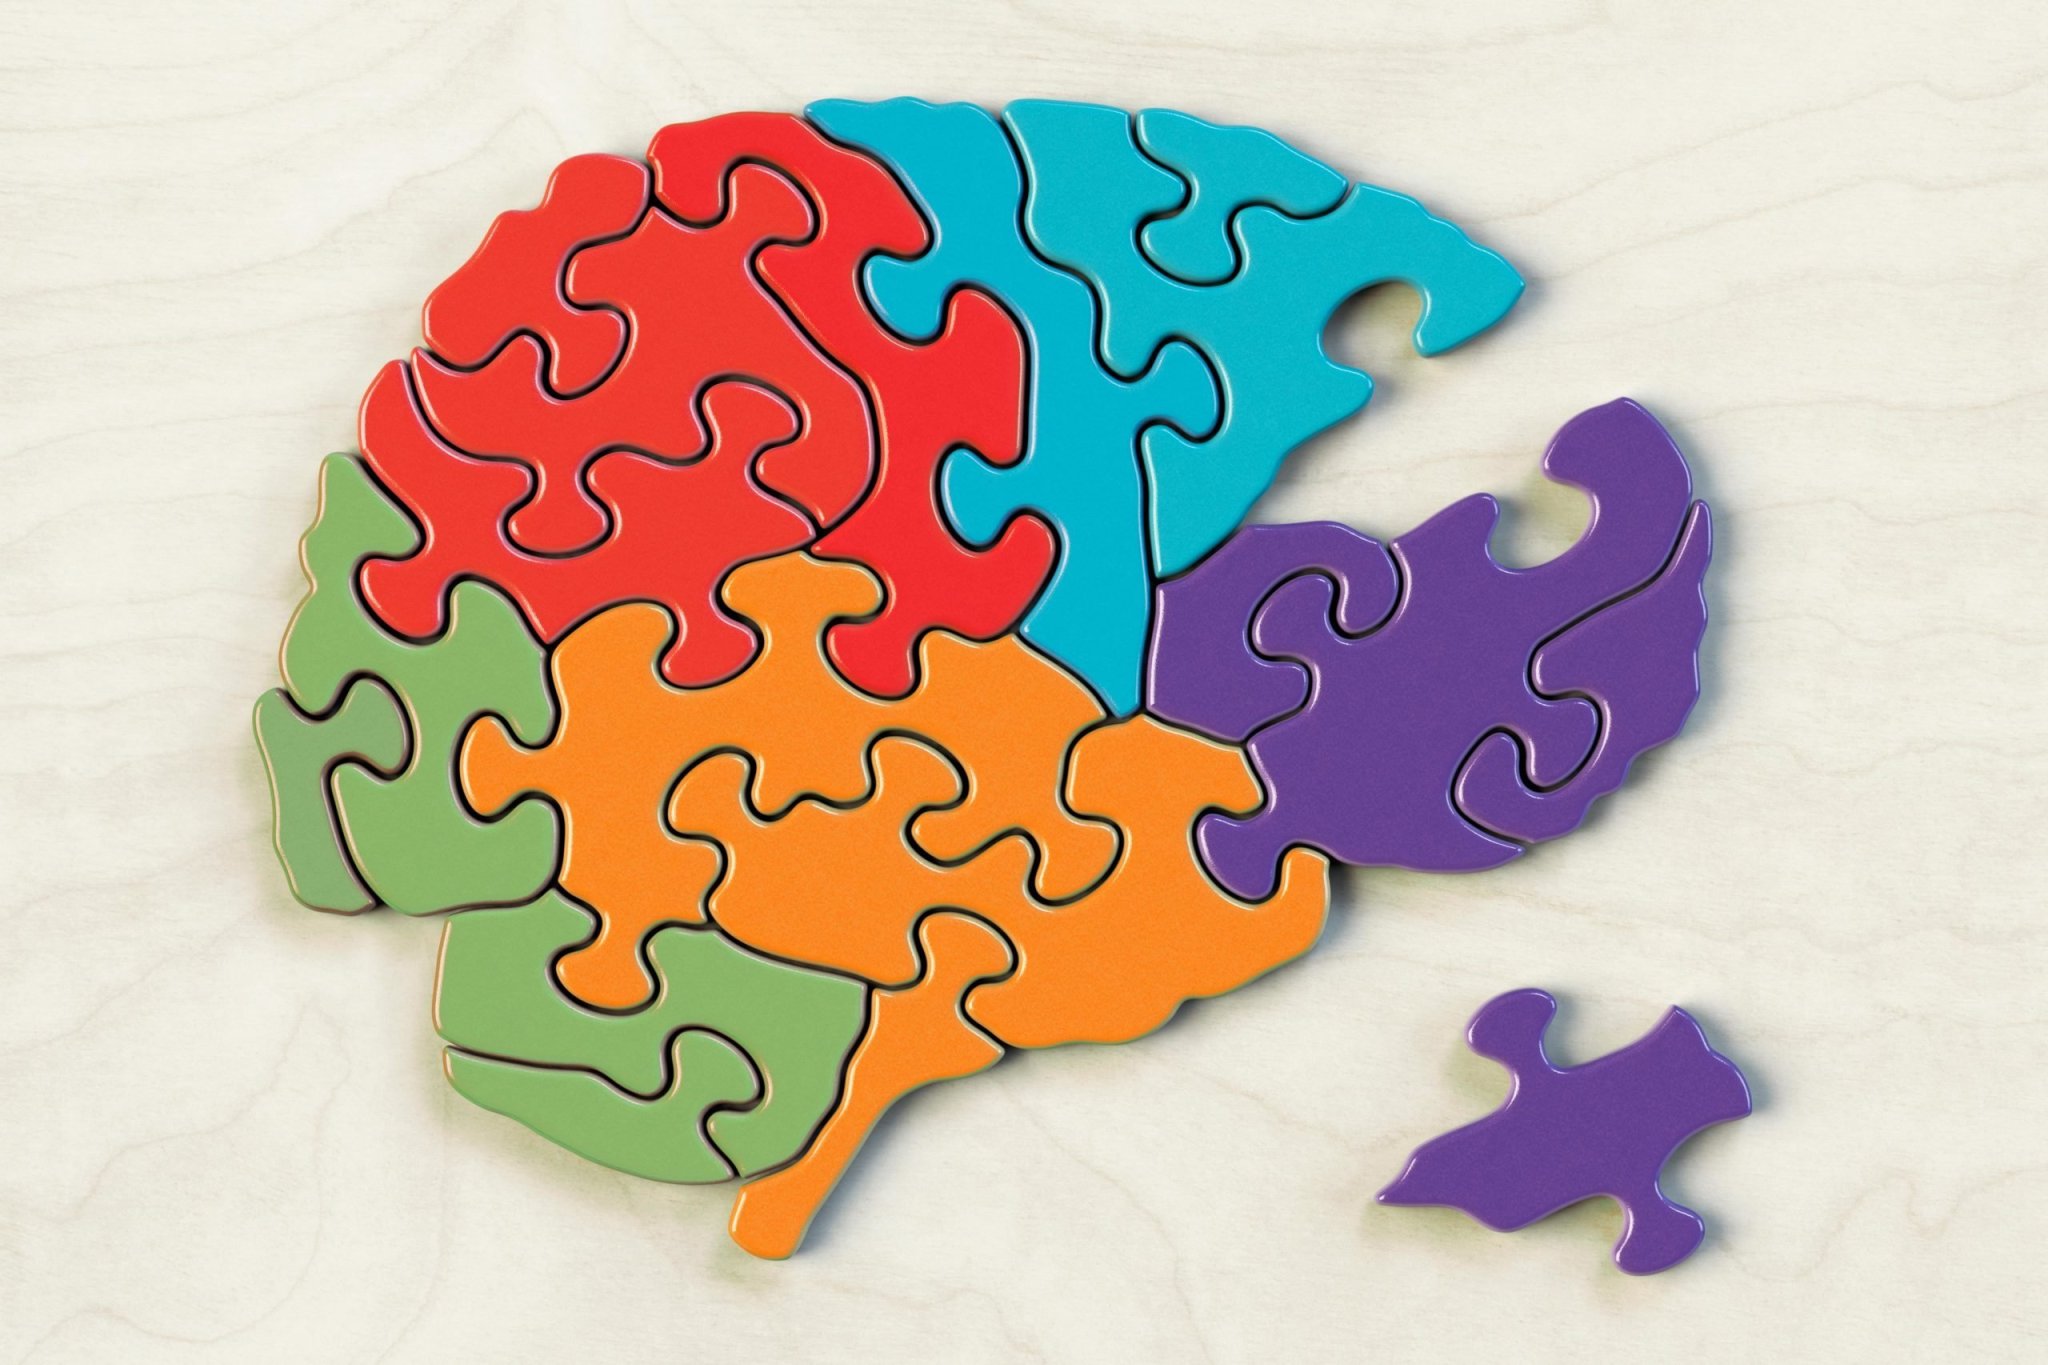 Best Brain Training Games: Riddles, Brain Teasers, Puzzles, and More